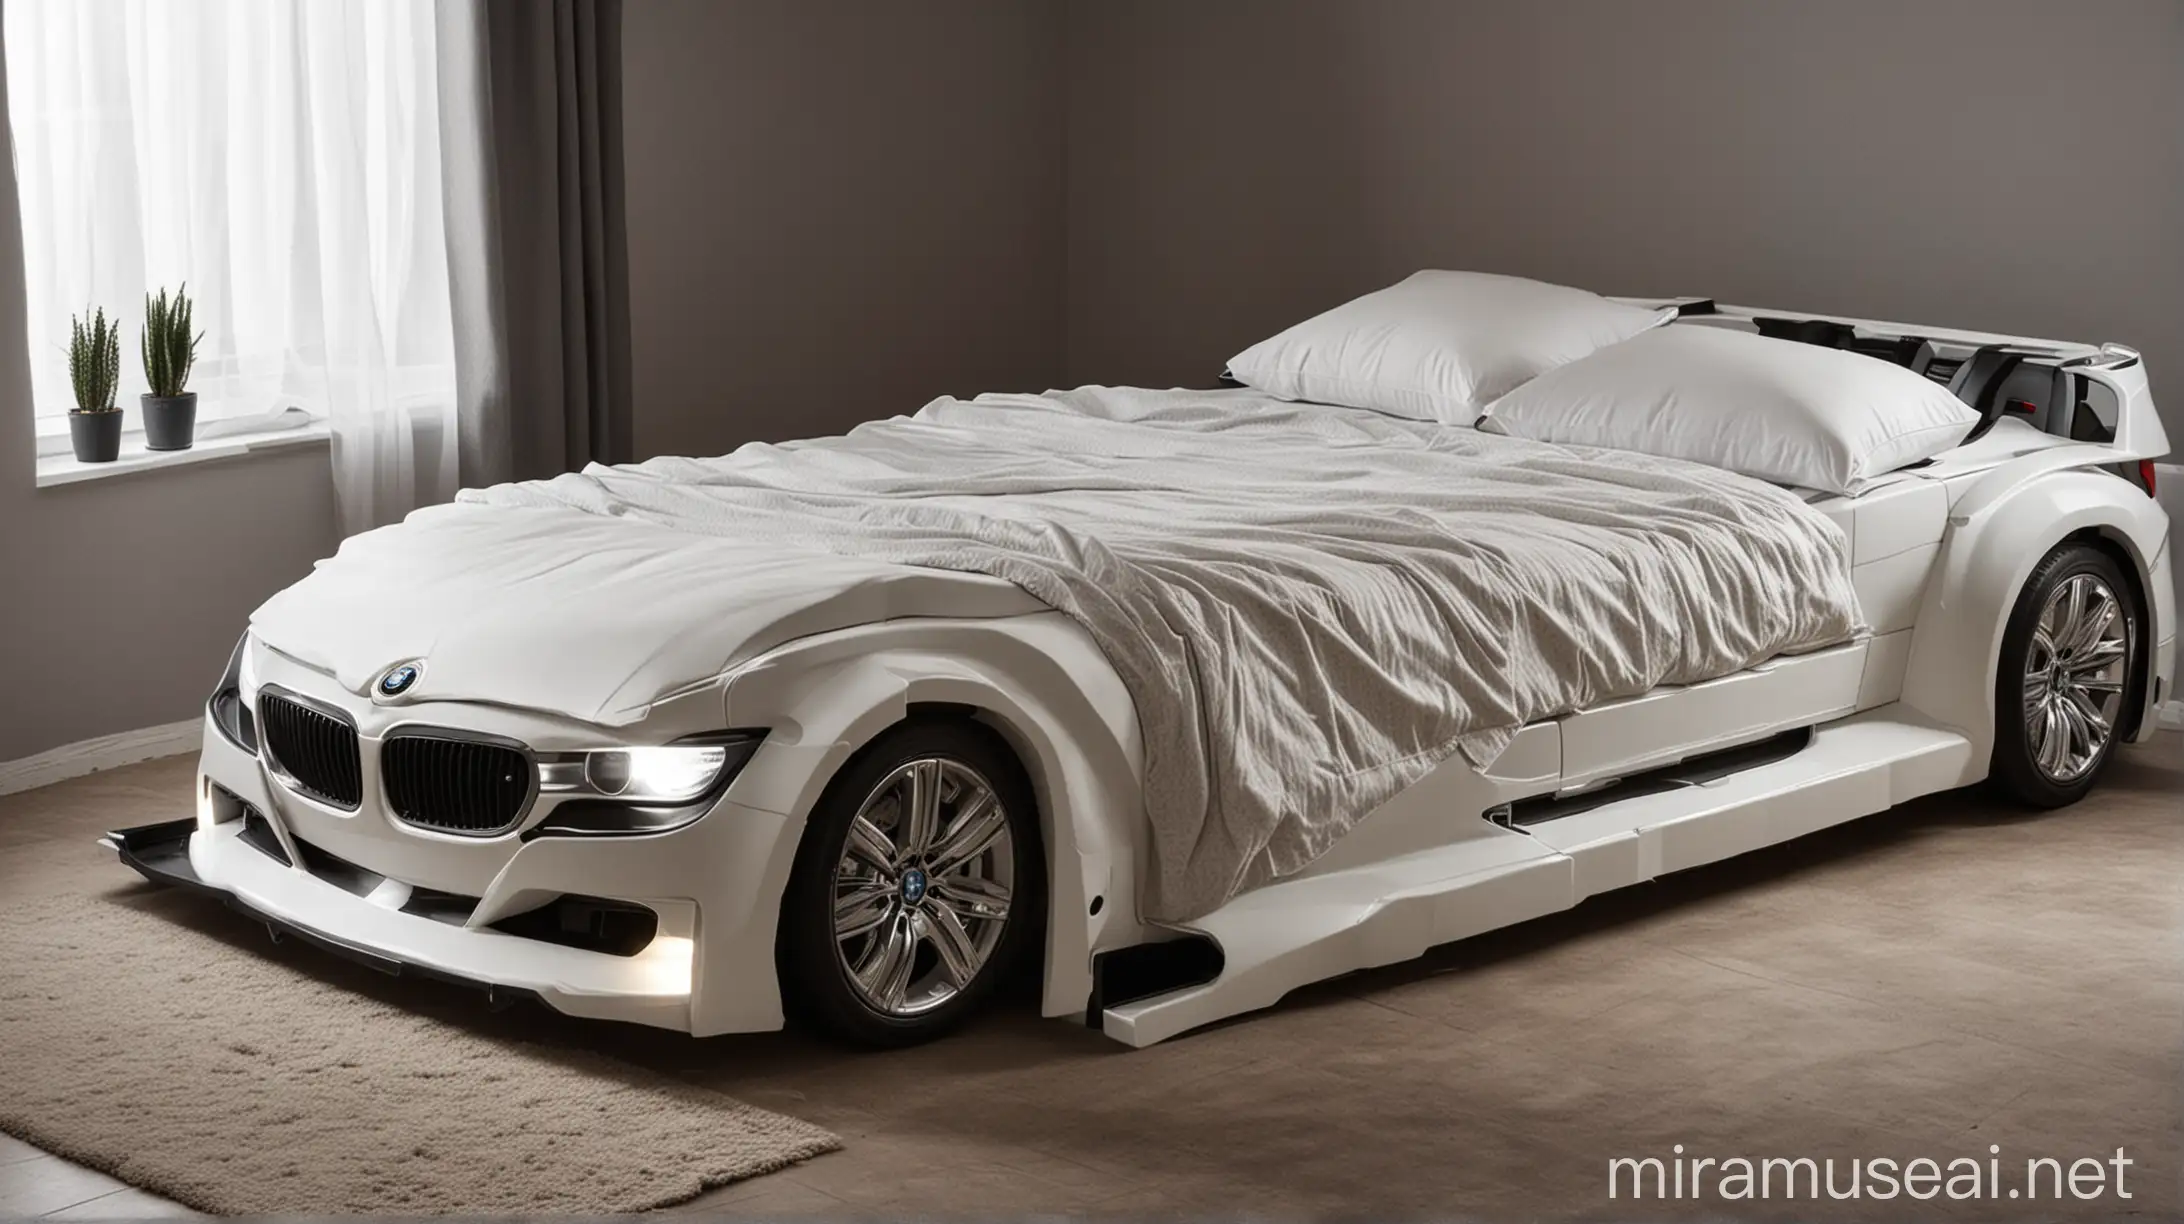 Double bed in the shape of a BMW car with headlights on